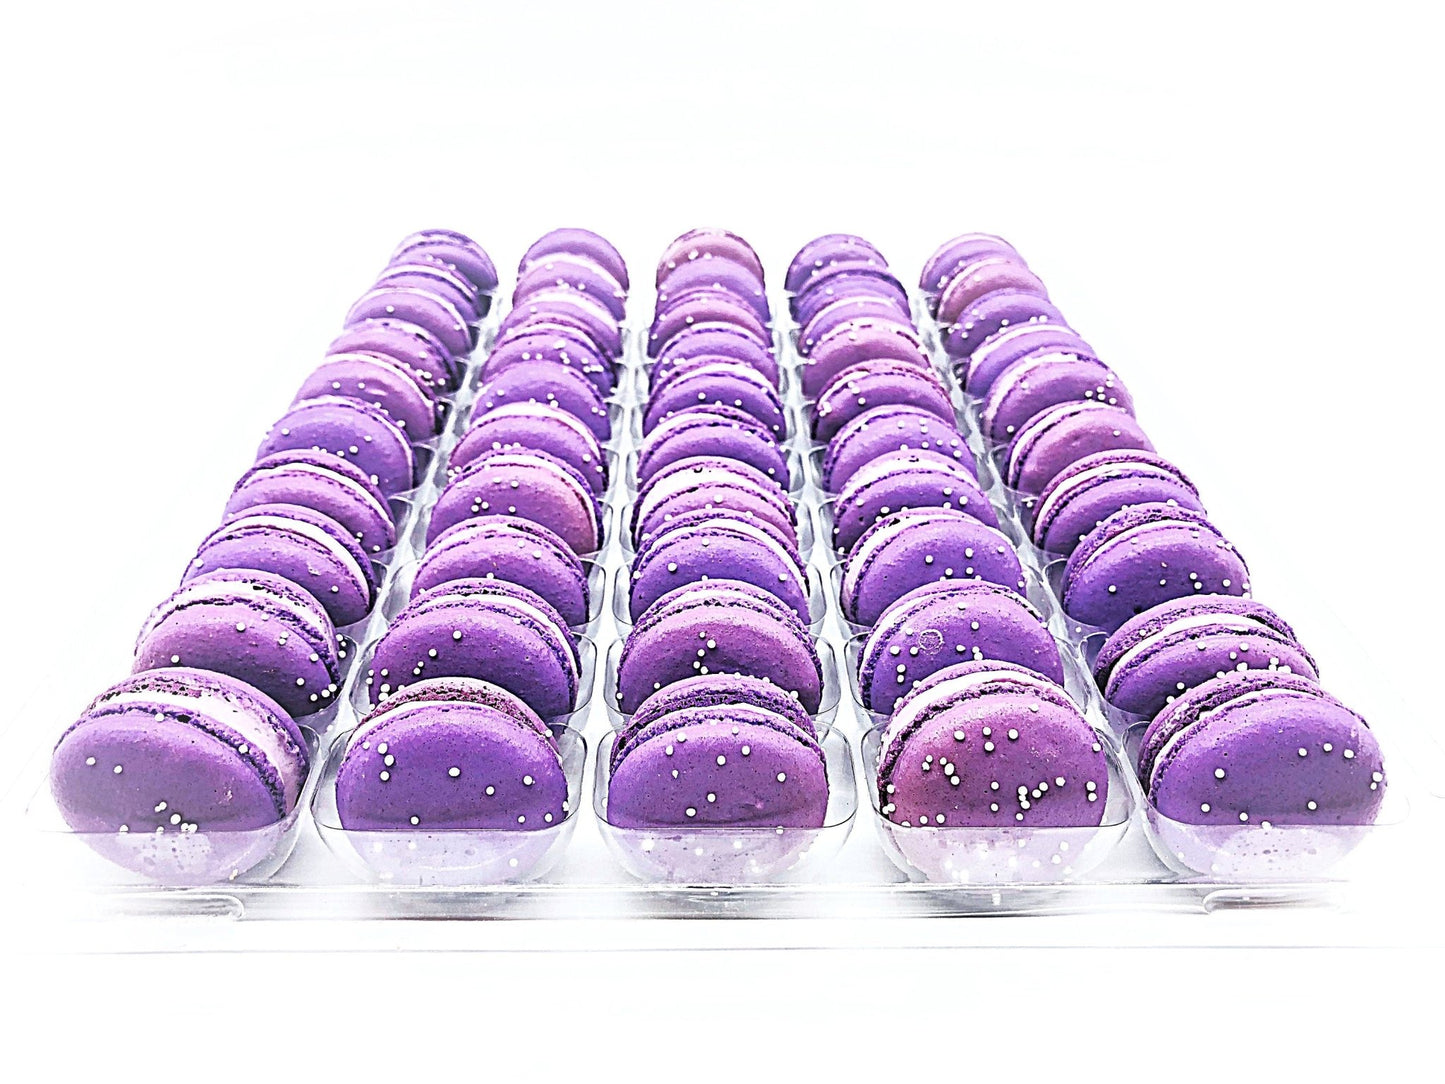 50 Pack Taro French Macaron Value Pack - Macaron Centrale